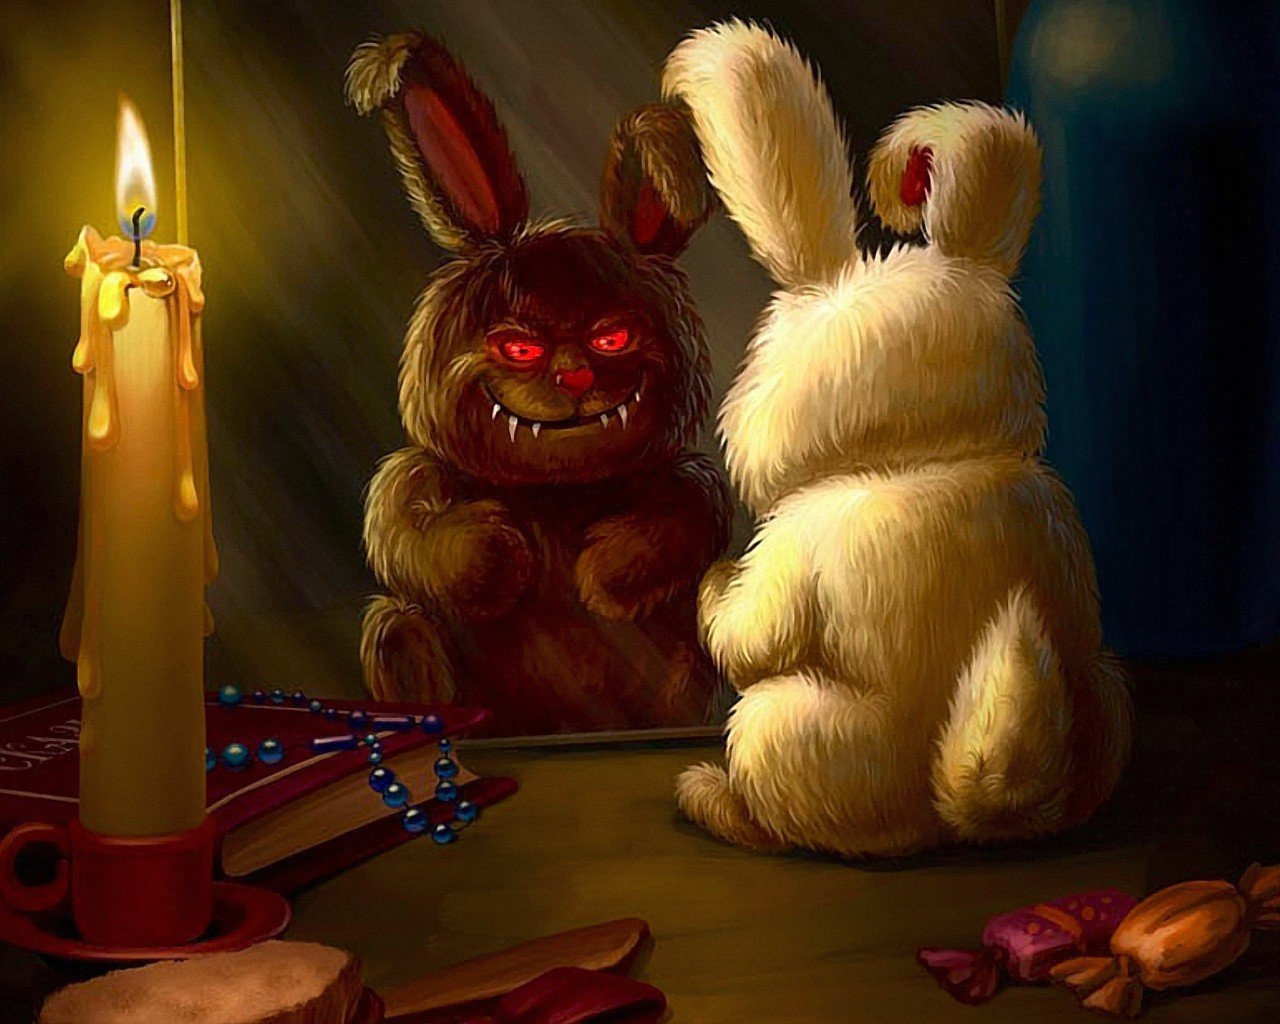 candle-rabbit-picture-evil.jpg